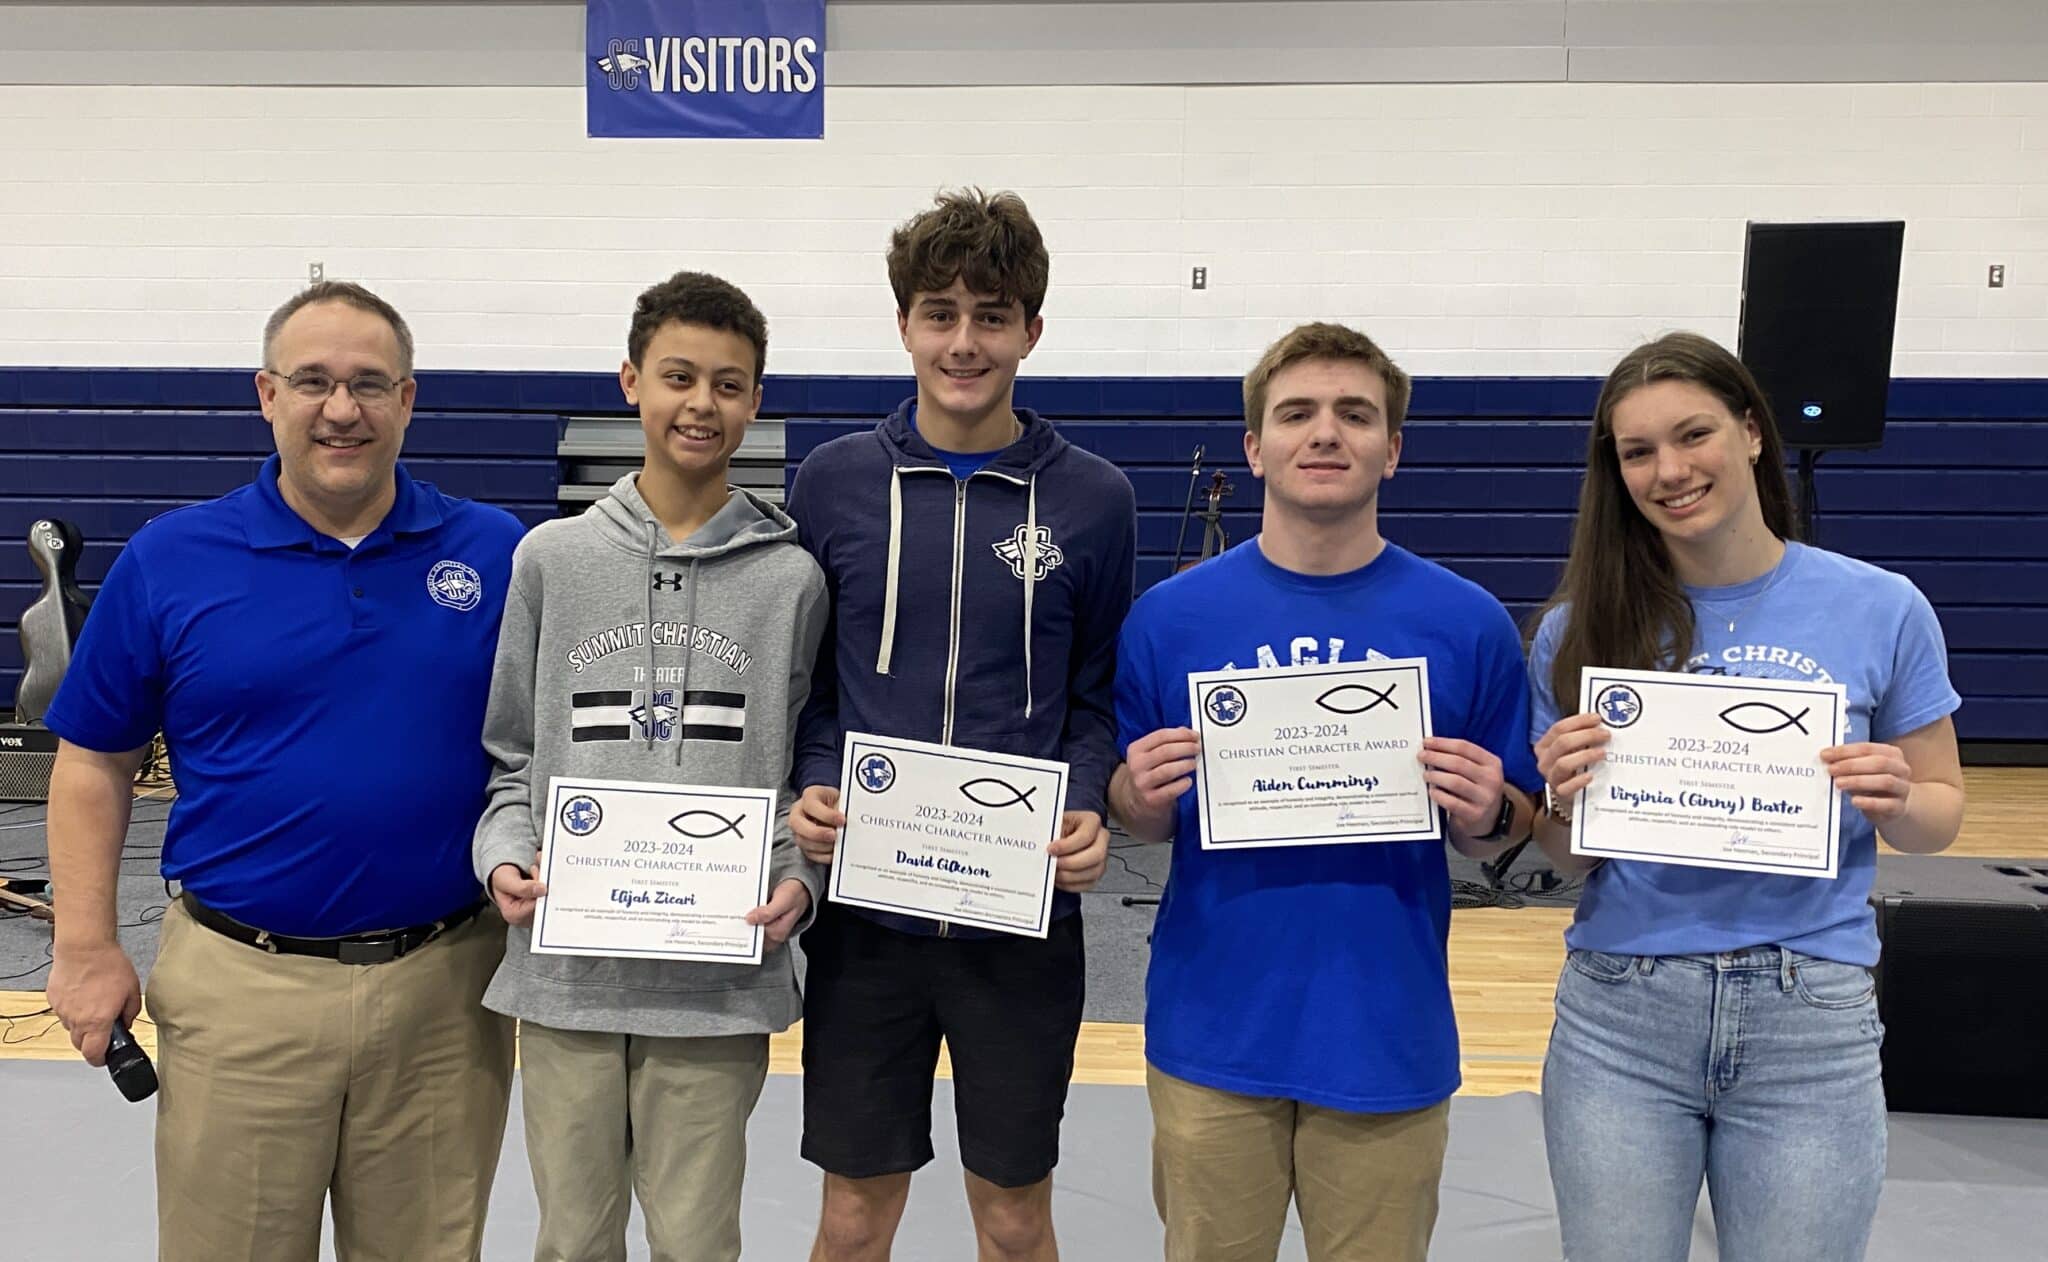 SCA recently announced the Secondary Christian Character Recipients for the 2023-24 first semester. Pictured left to right are SCA Secondary Principal Joe Hesman with award winners eighth grade student Elijah Zicari, senior David Gilkeson, sophomore Aidan Cummings, and senior Ginny Baxter. Not photographed is eighth grade student Regan McCarty.